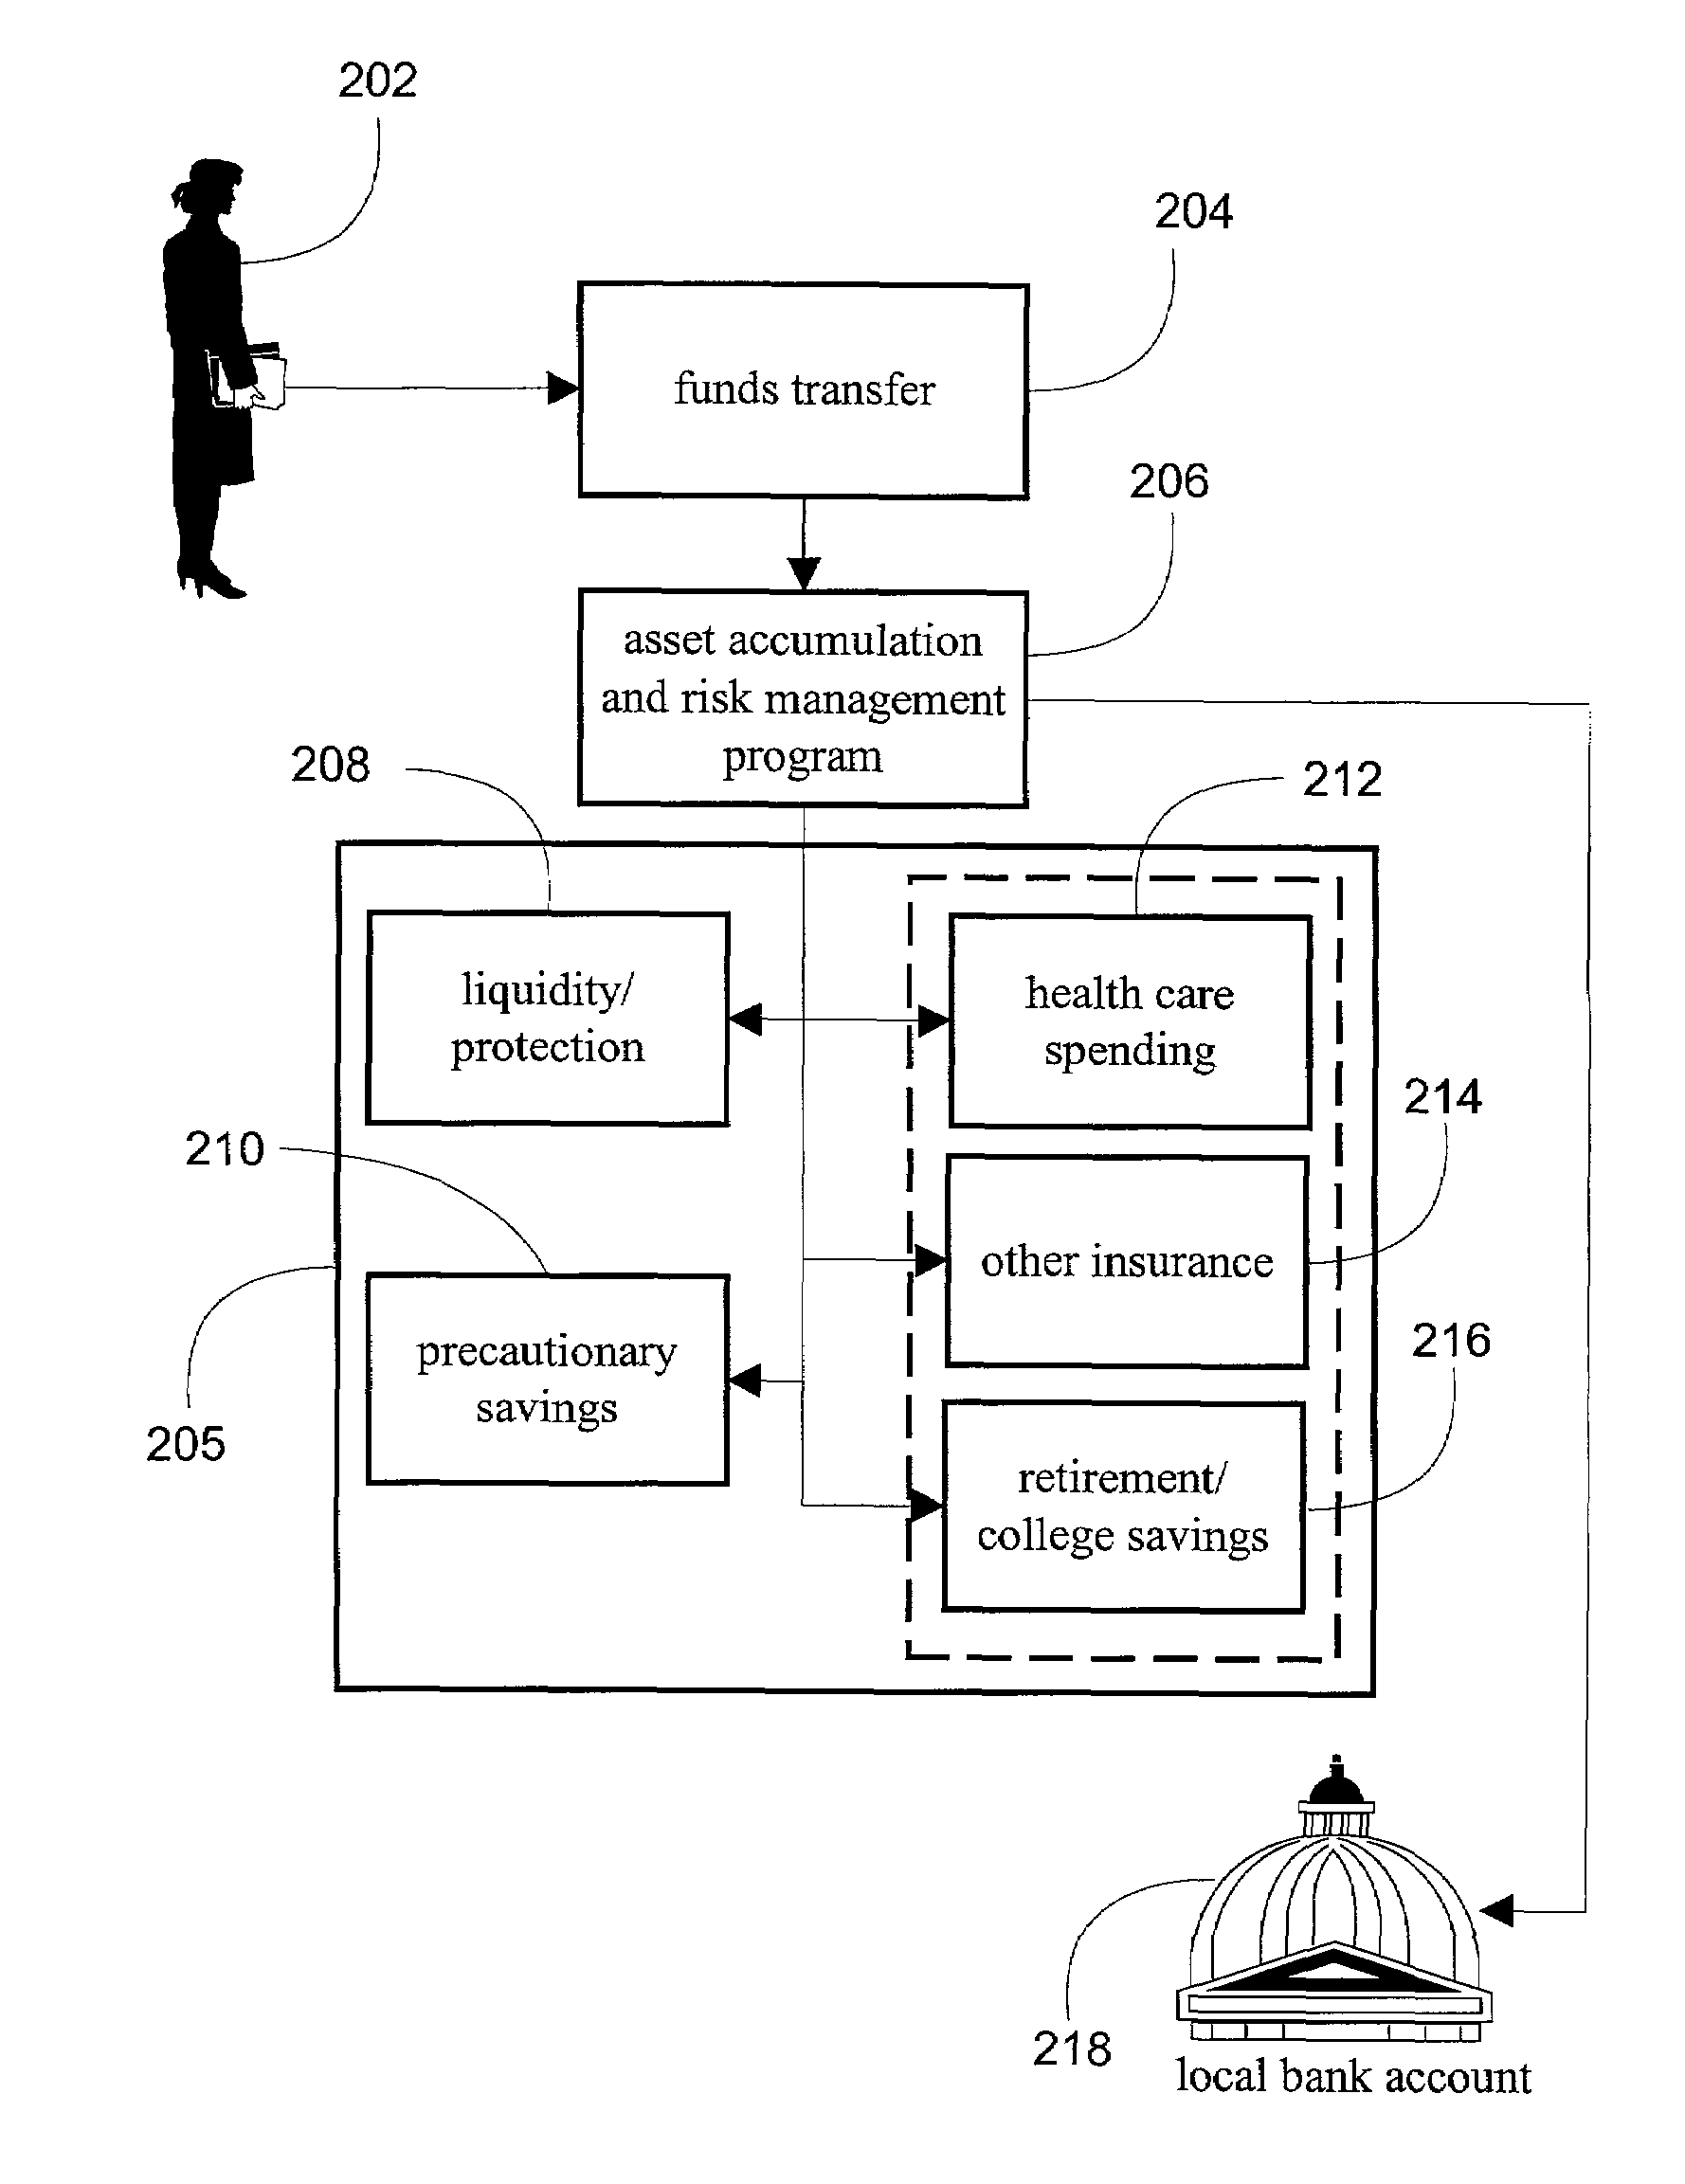 System and method for asset accumulation and risk management